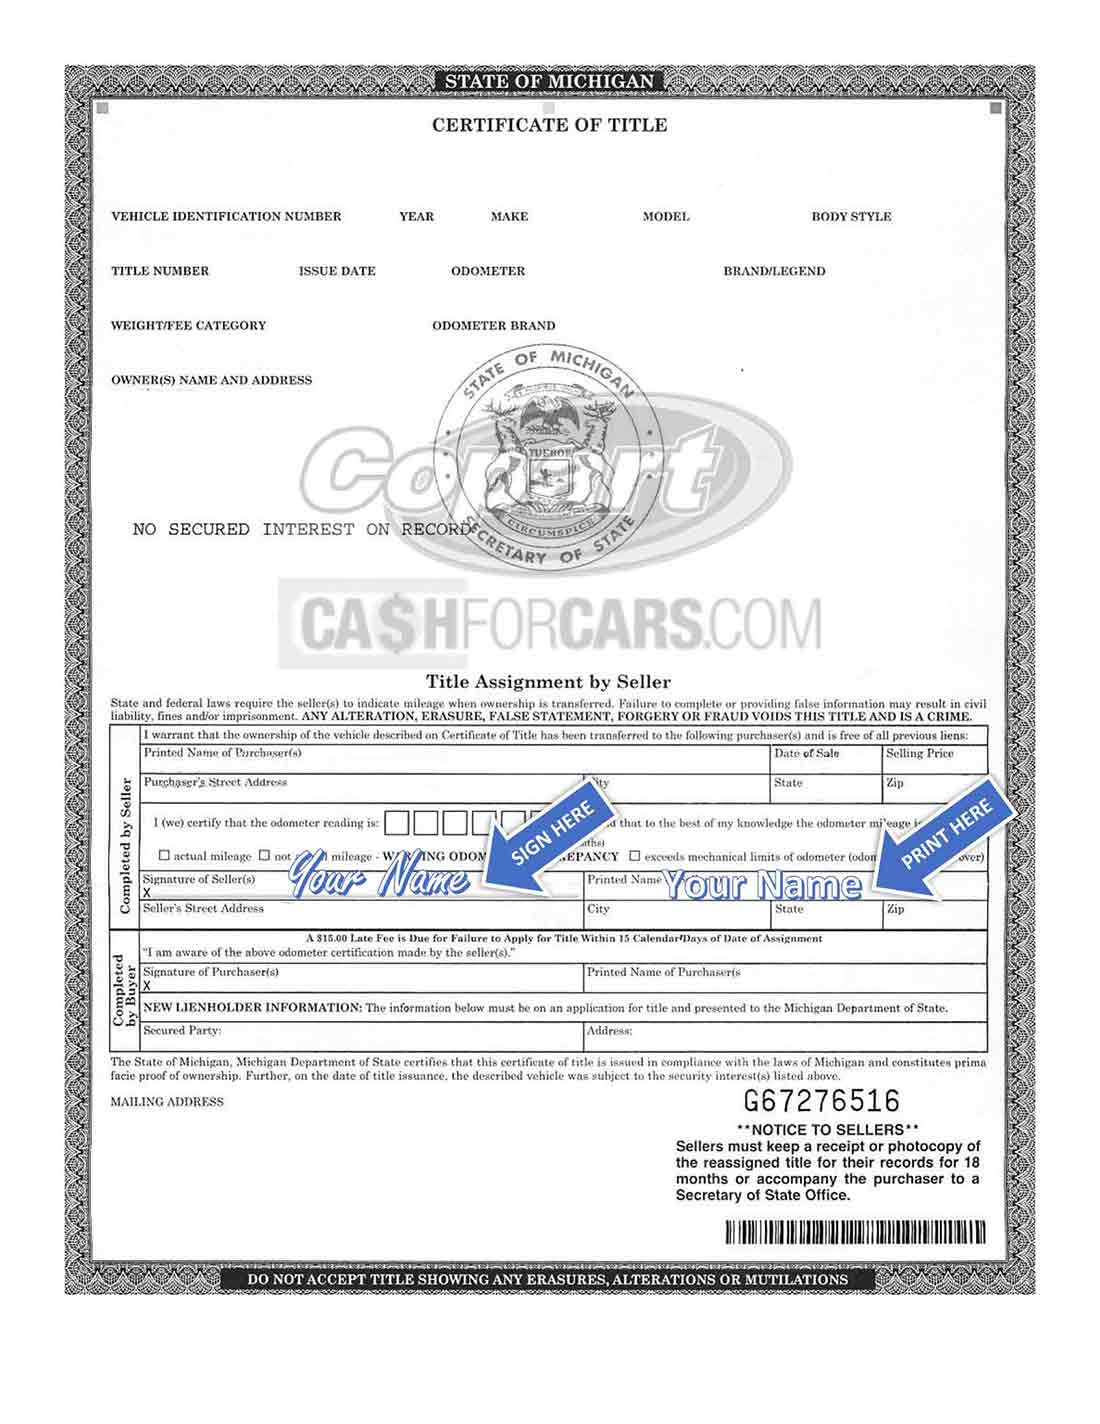 How To Sign Your Car Title In Michigan Cashforcars Com